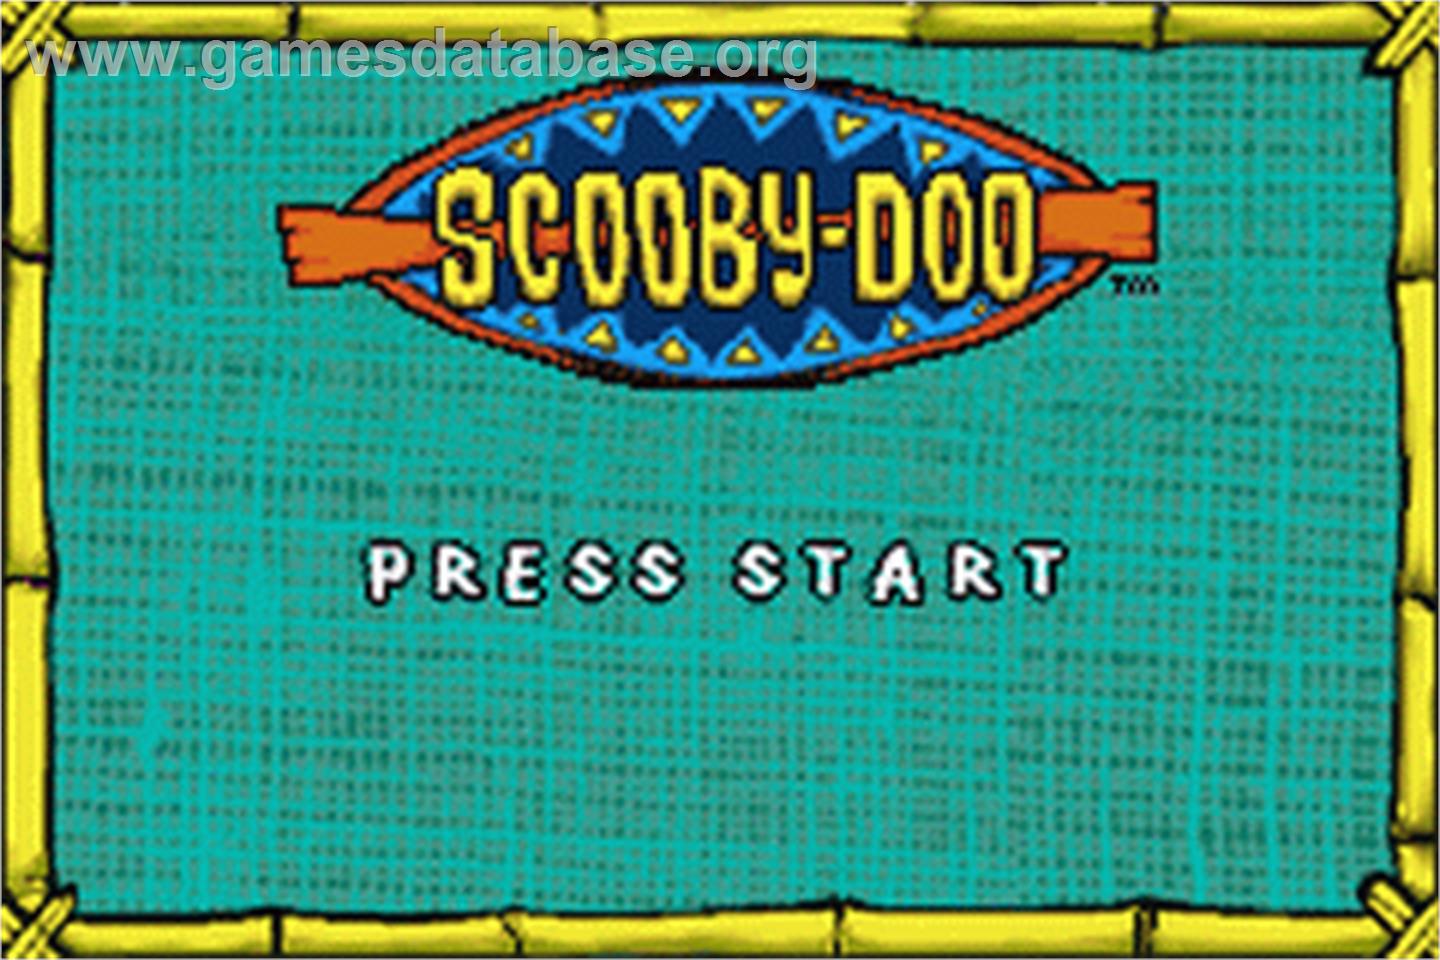 Scooby Doo: The Motion Picture - Nintendo Game Boy Advance - Artwork - Title Screen